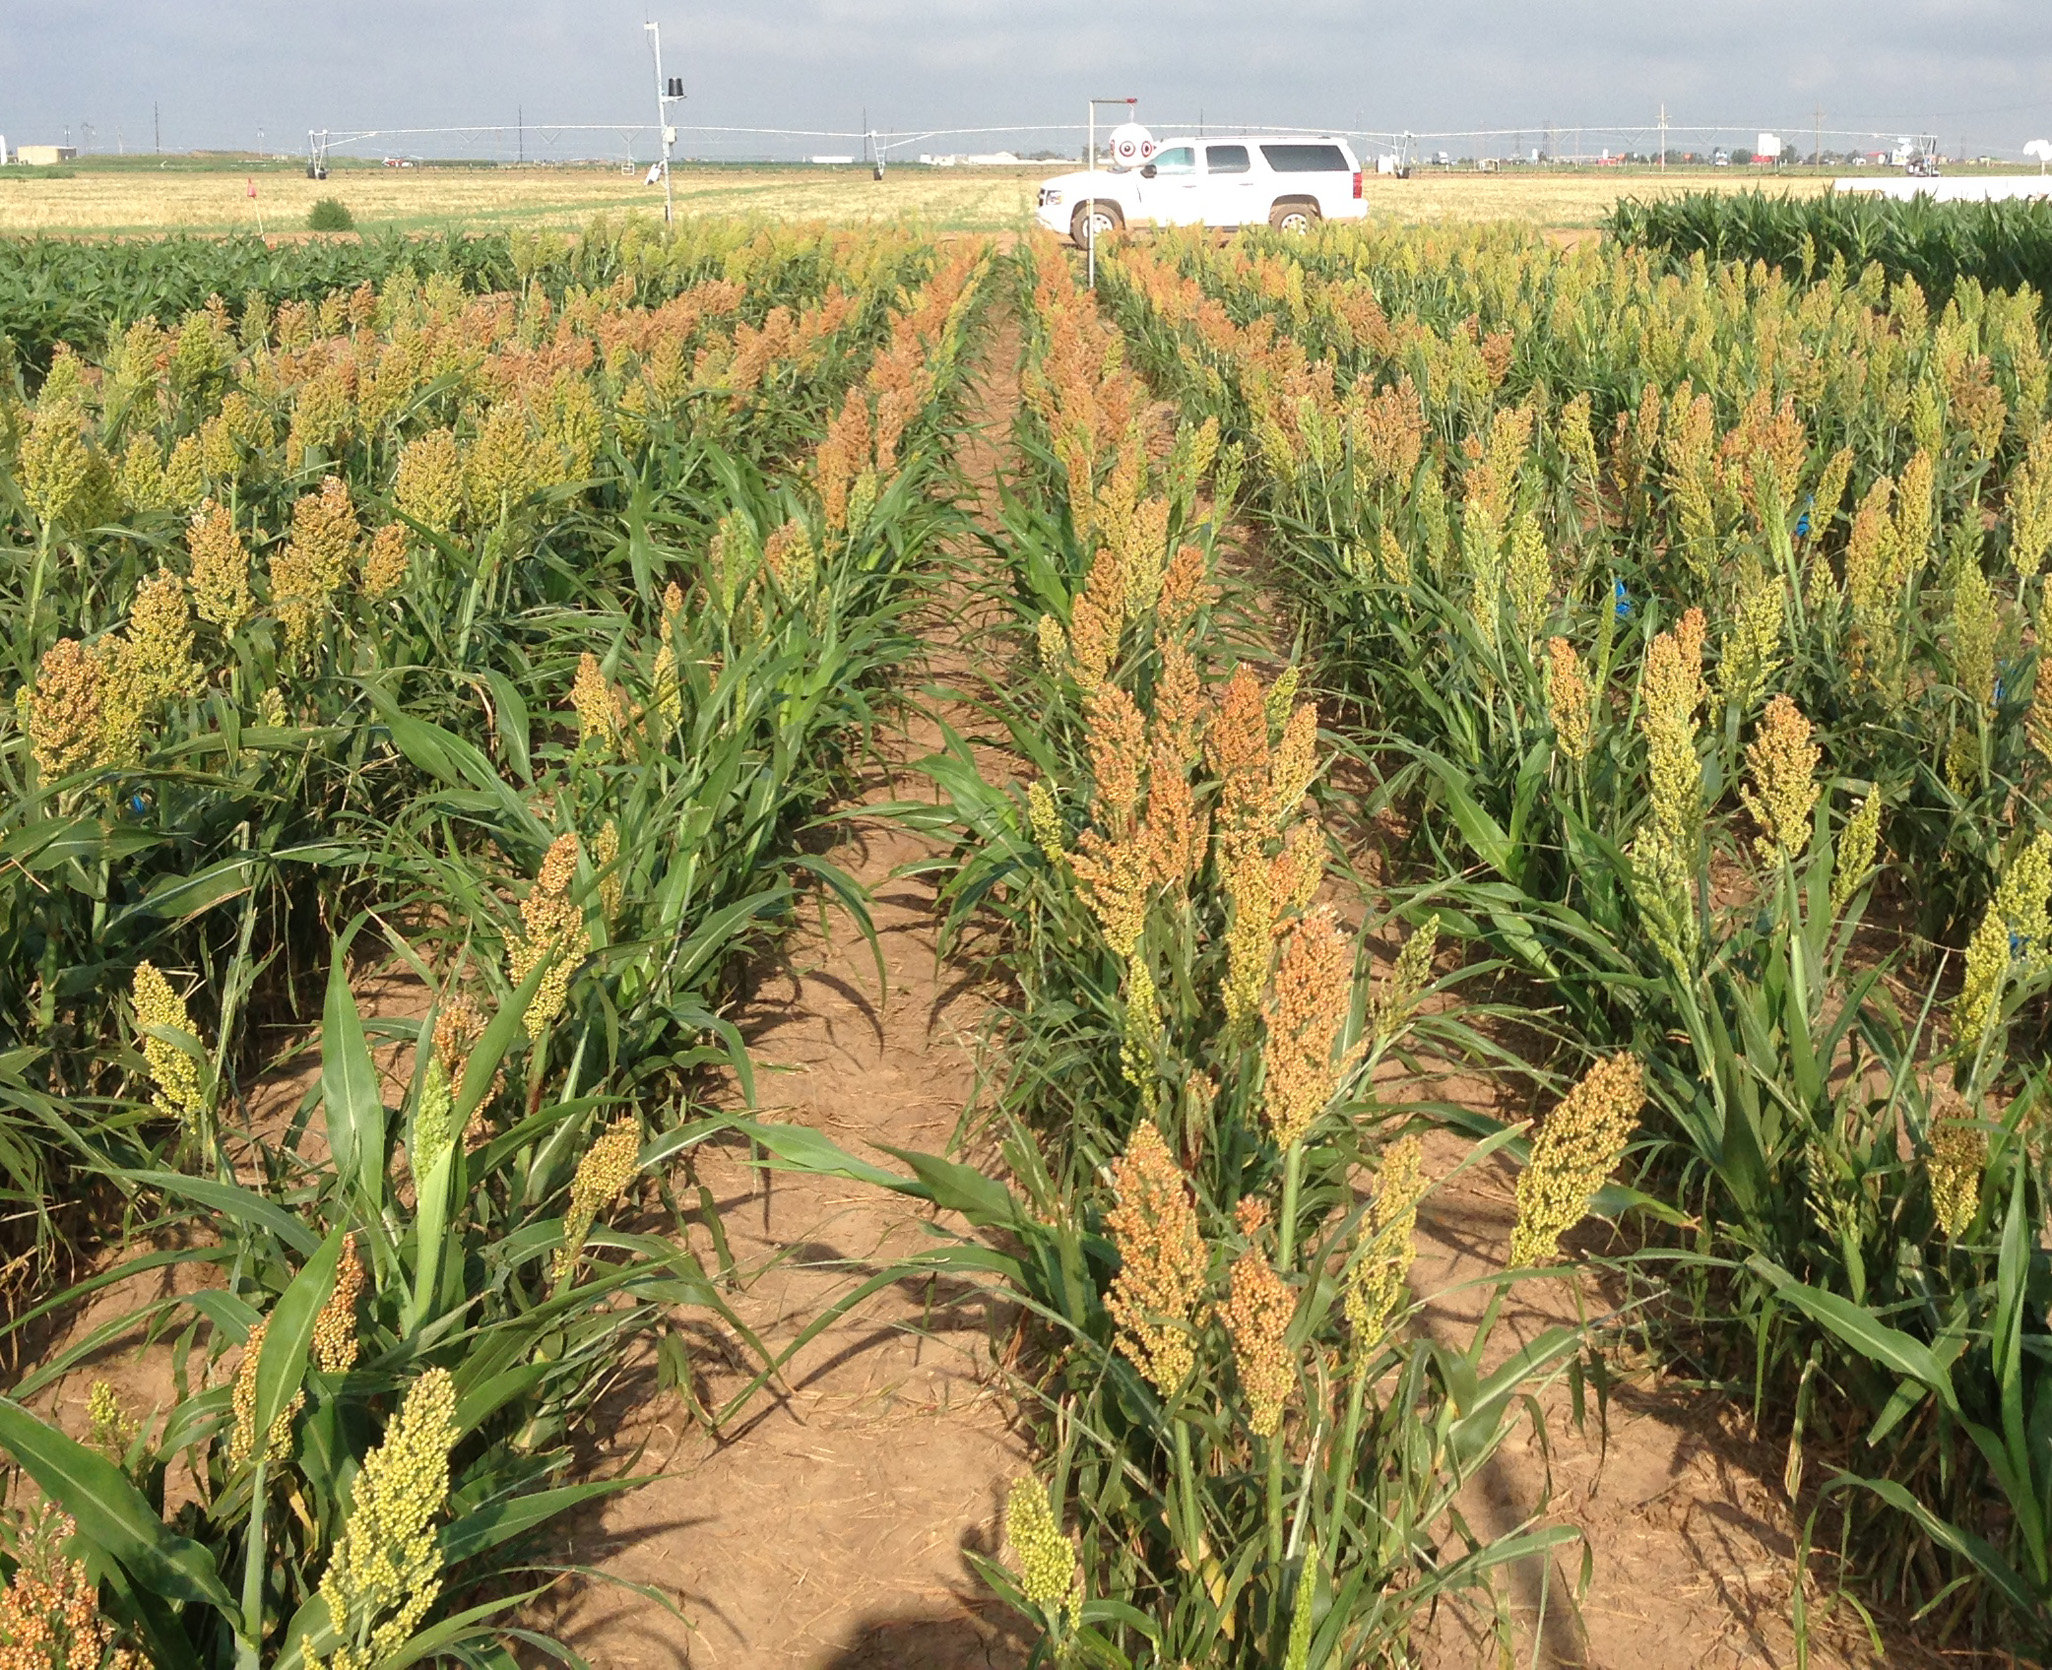 Water Use Drought tolerant Hybrids Still Key To Dryland Crop Production